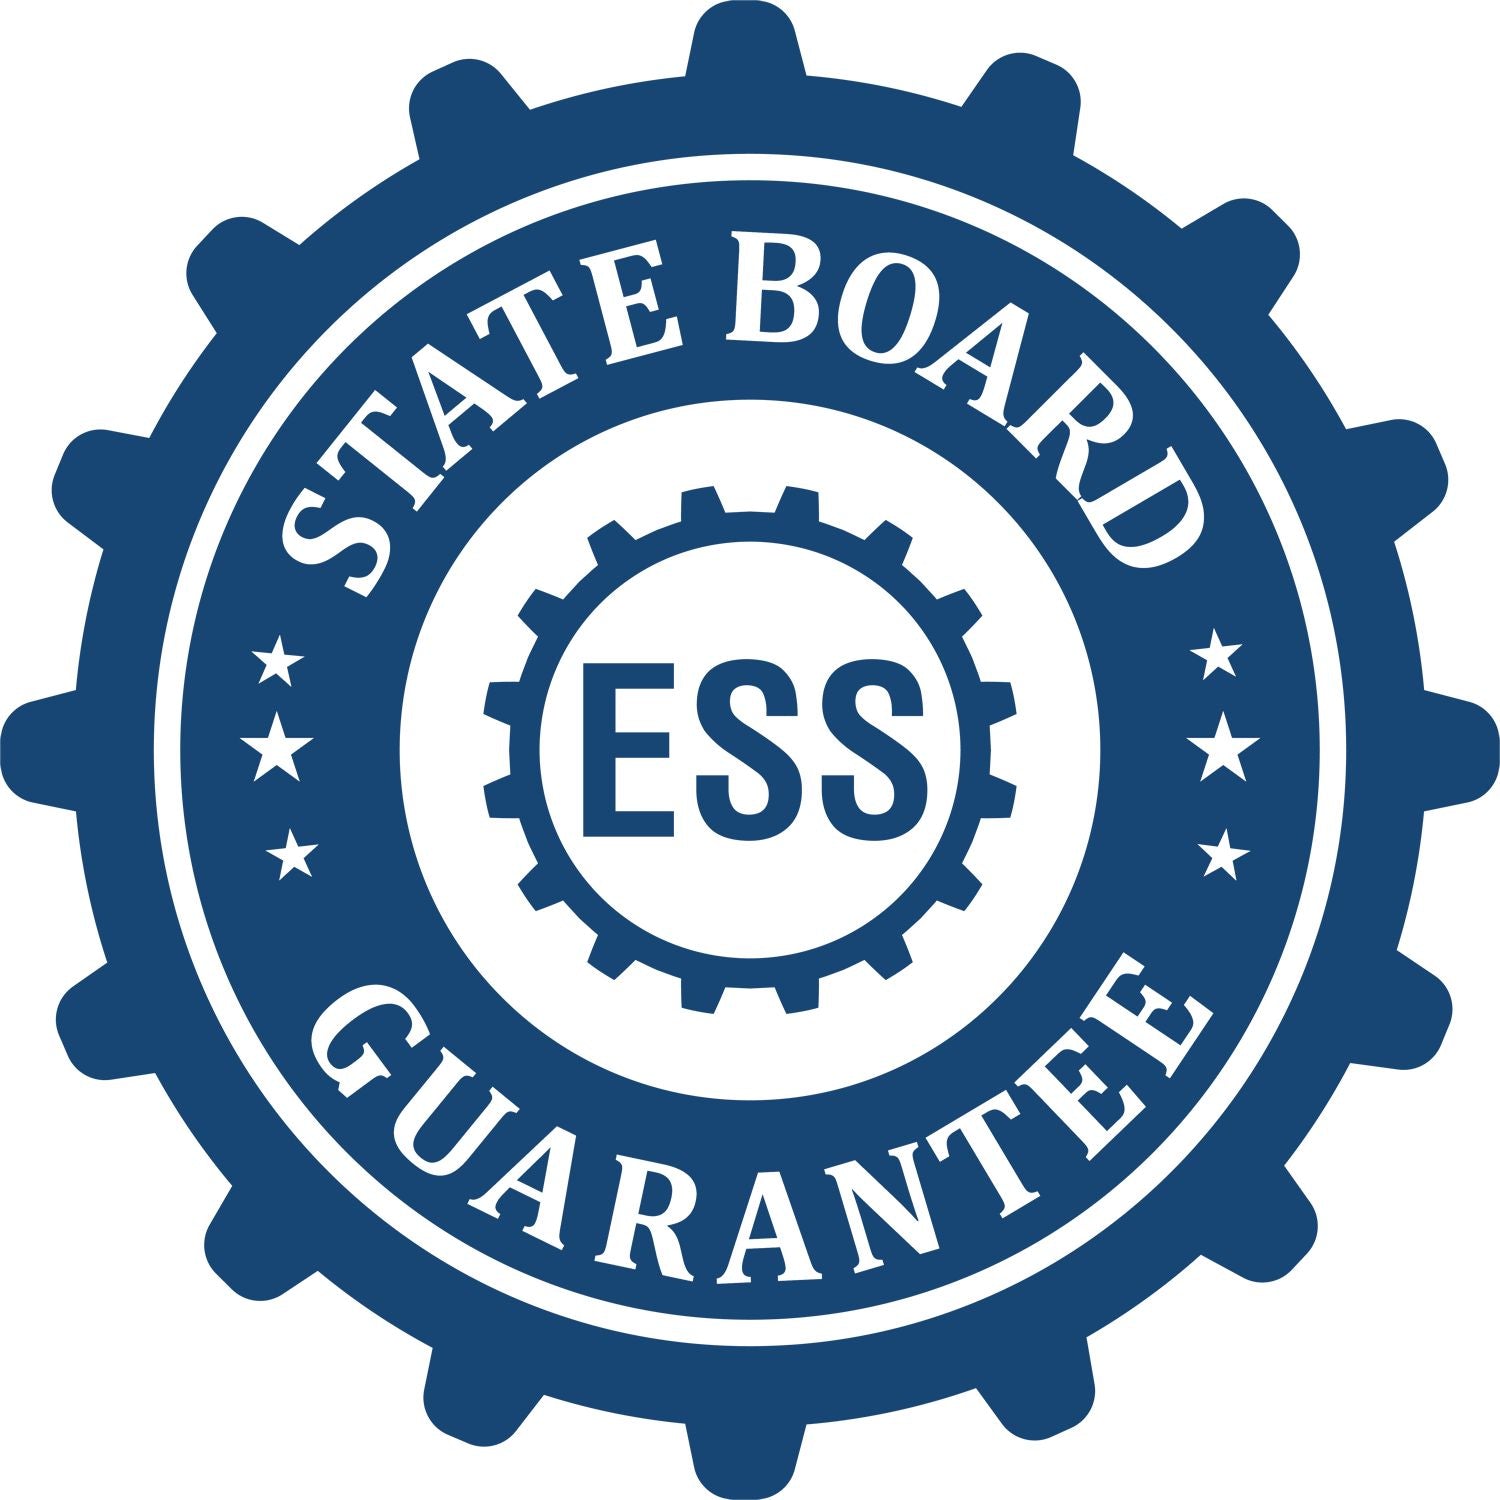 An emblem in a gear shape illustrating a state board guarantee for the Virginia Desk Surveyor Seal Embosser product.